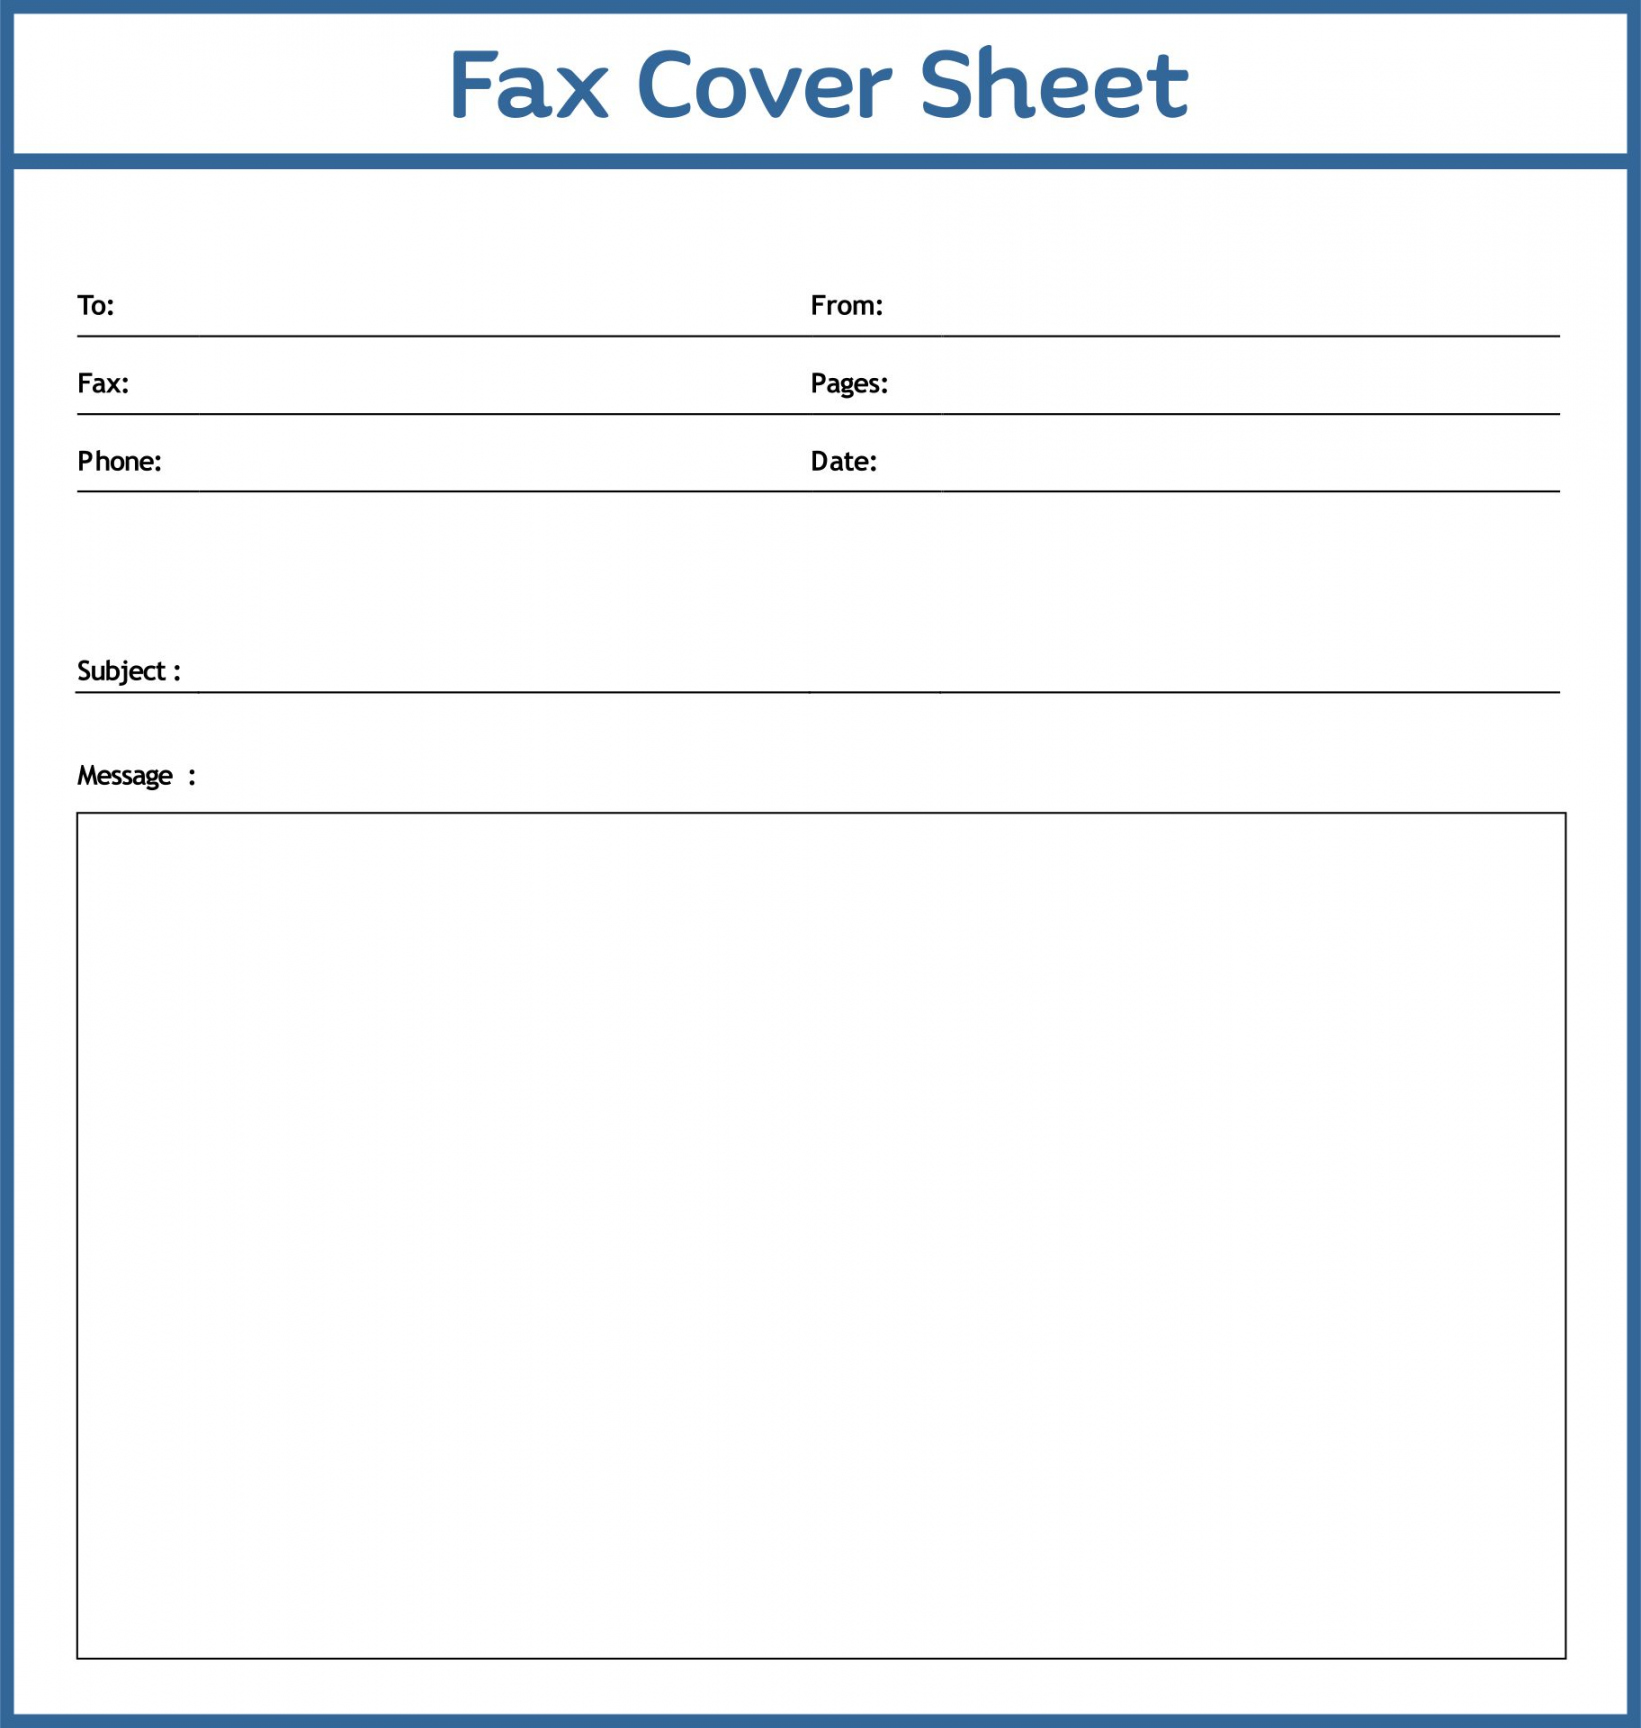 Free Printable Fax Cover Sheet - Printable -  Best Printable Fax Cover Sheet - printablee